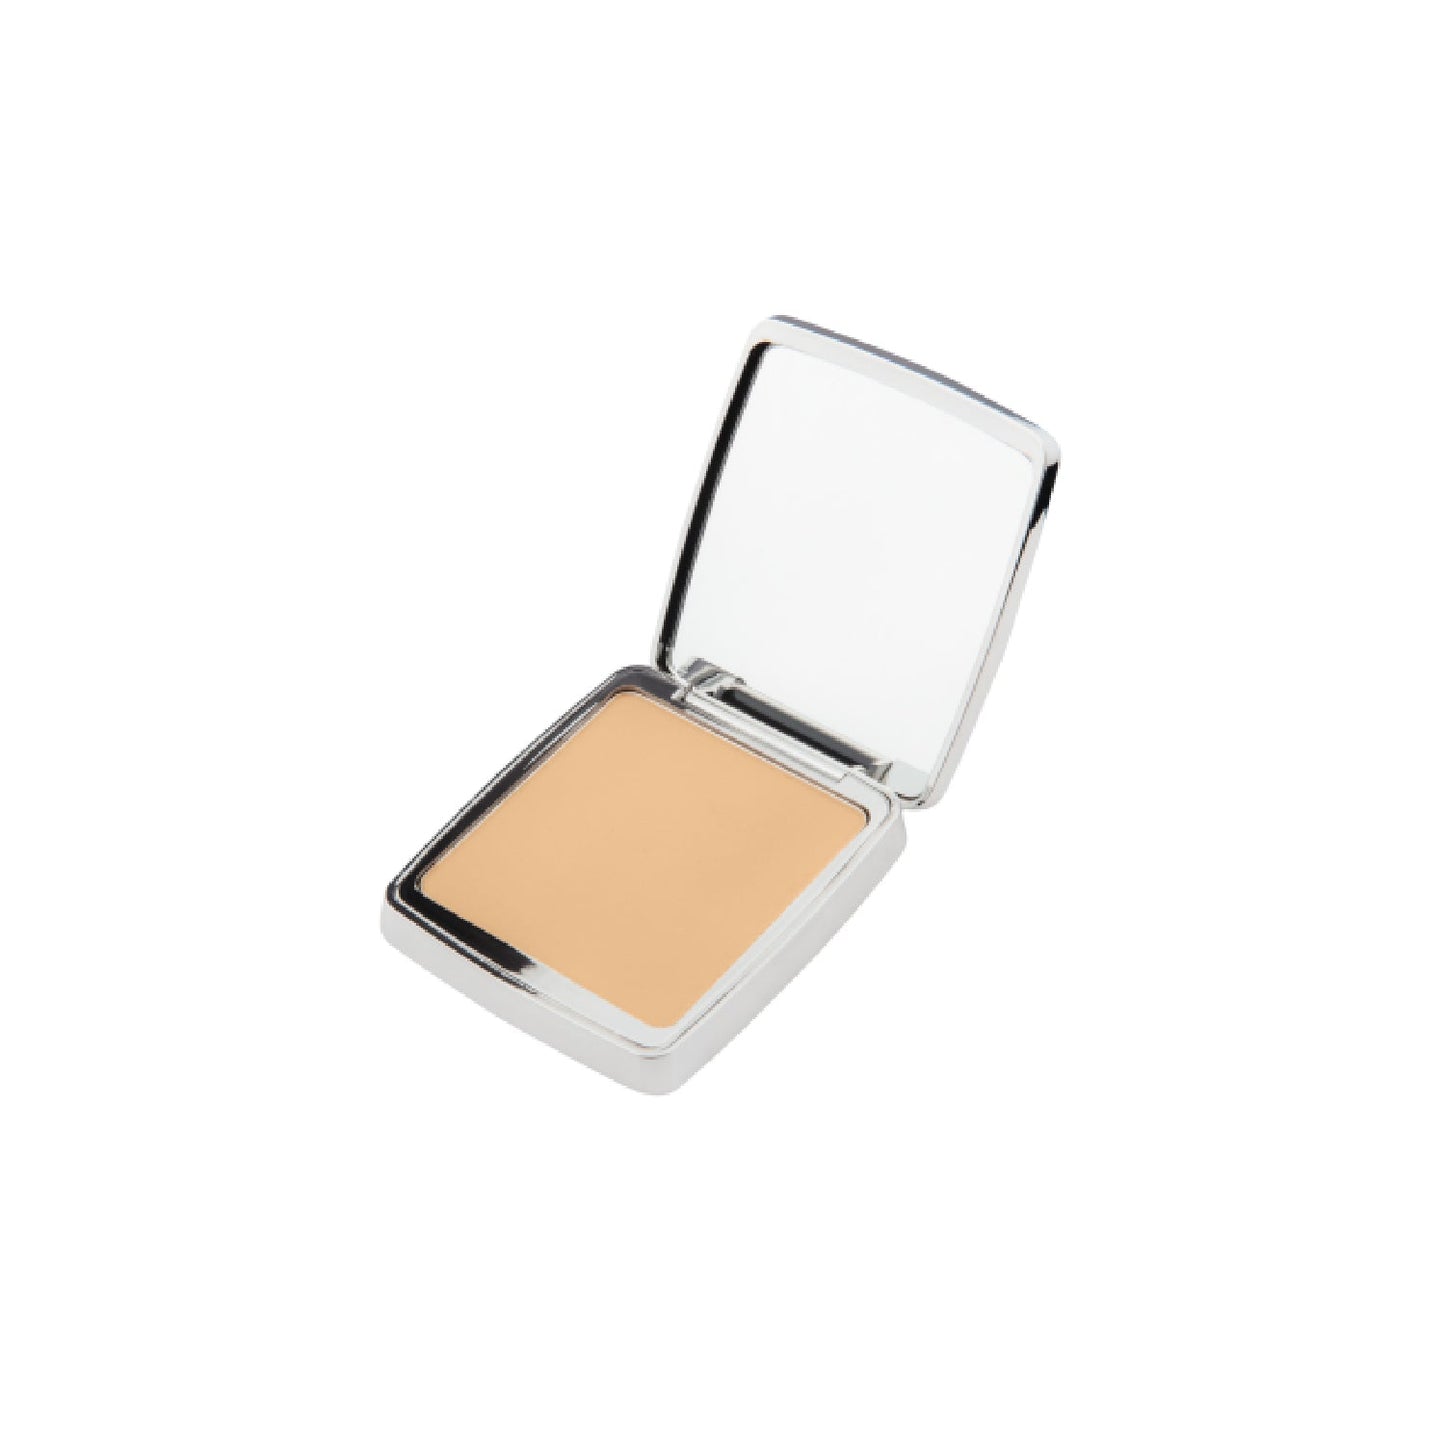 Lenphor Flawless Matte Compact Powder With Spf 25